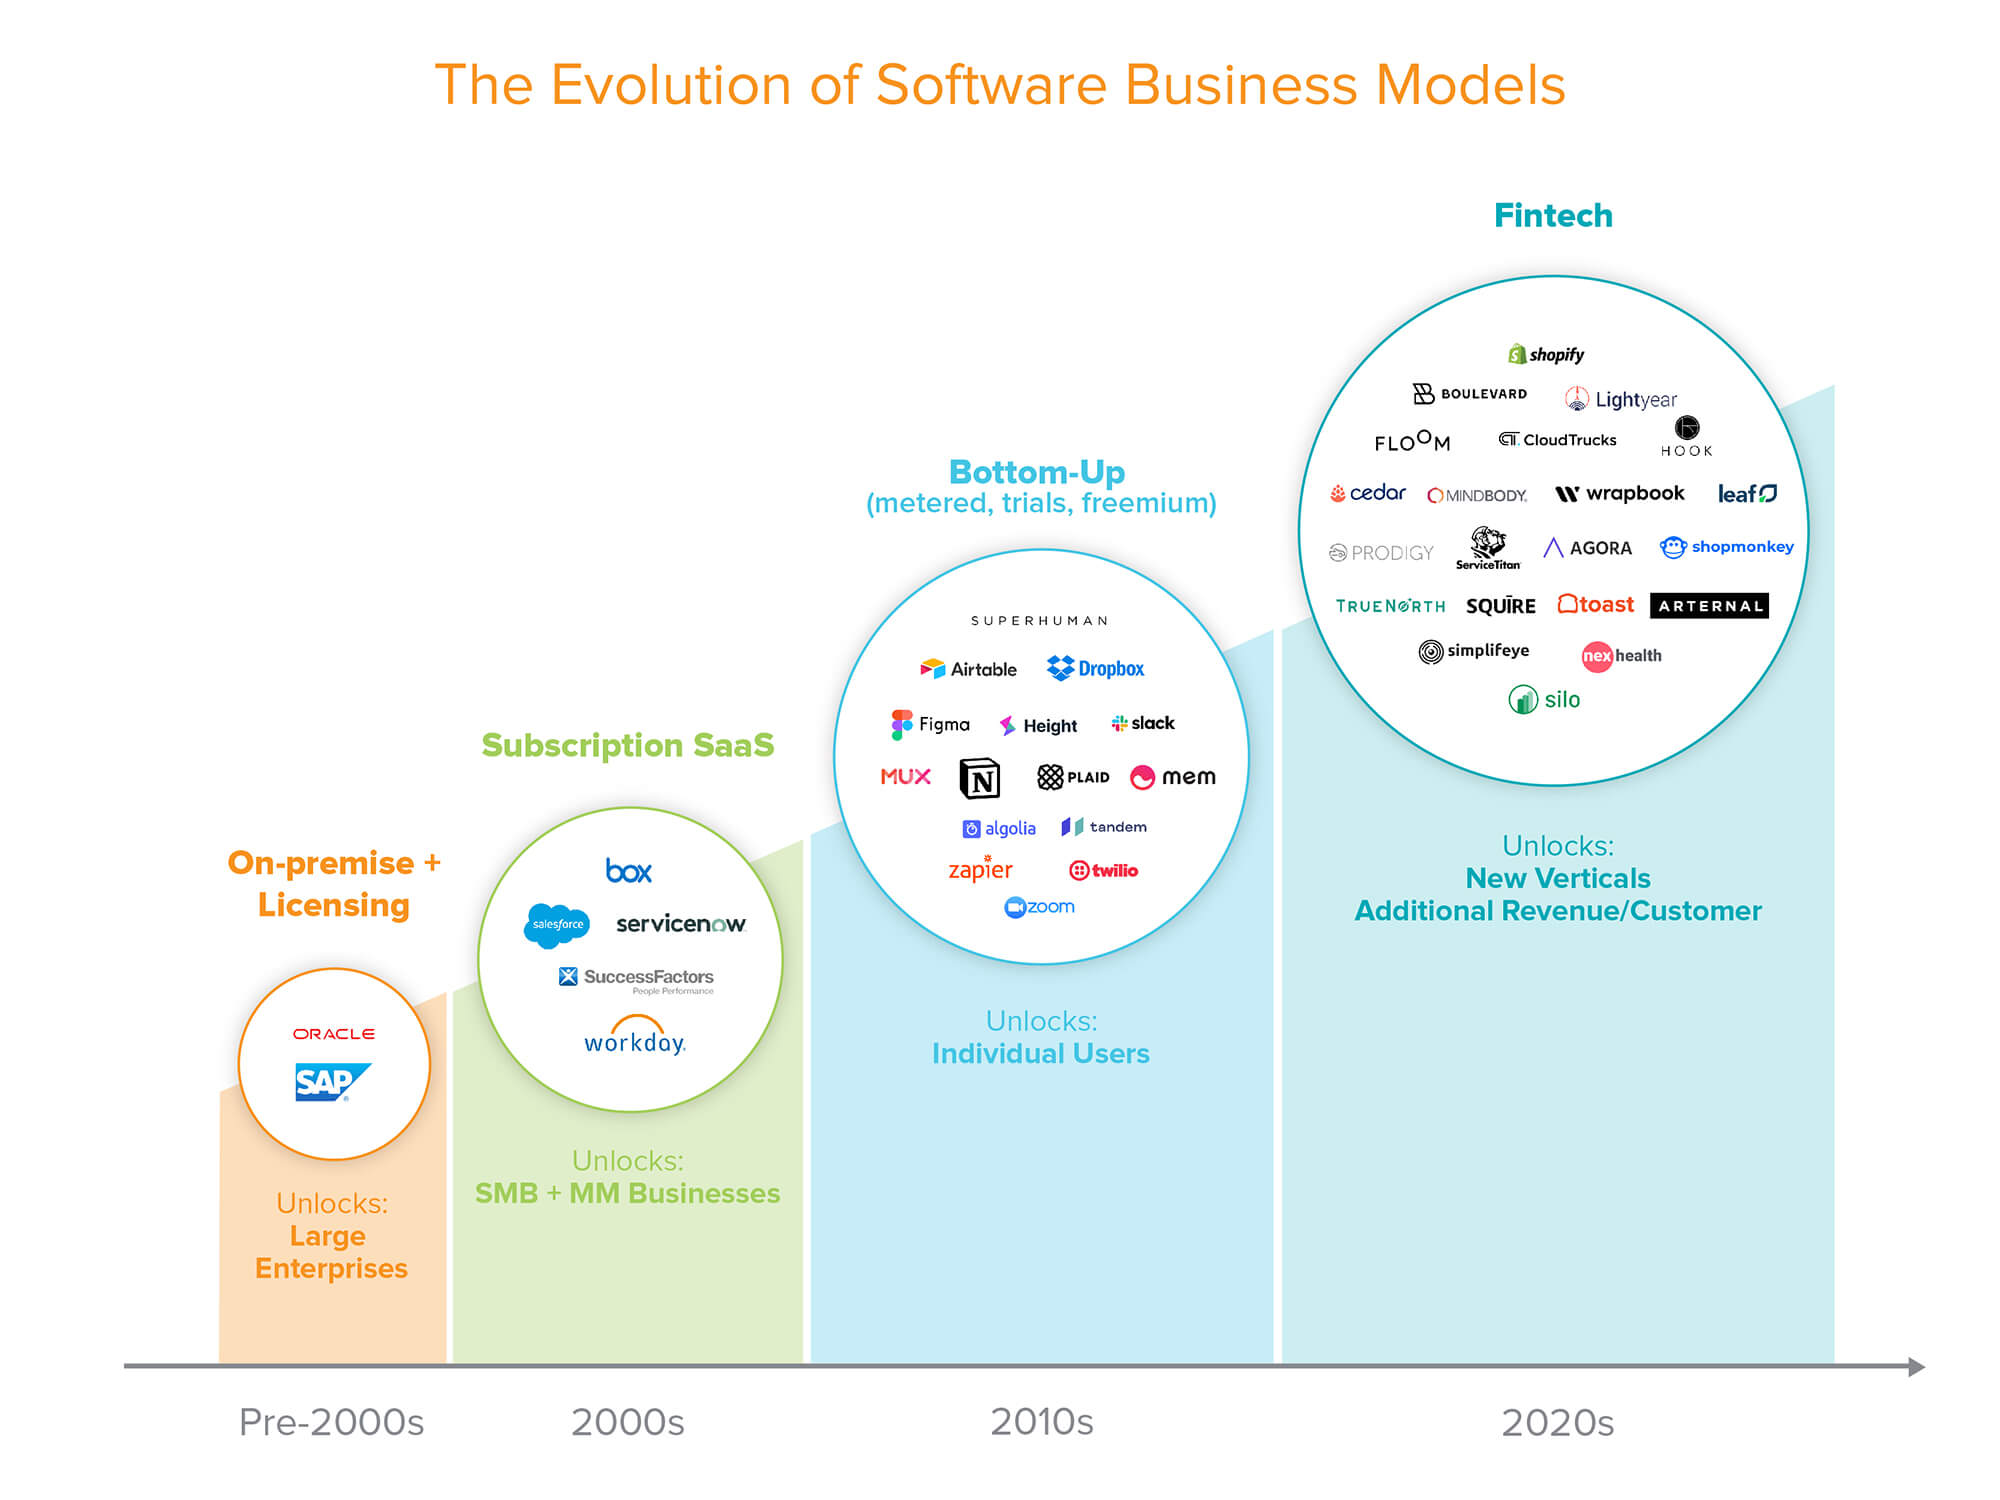 https://a16z.com/wp-content/uploads/2020/08/Why-Fintech-is-the-Next-Wave-in-Monetizing-Vertical-SaaS-R3v7_The-Evolution-of-Software-Revenue-Models-1.jpg